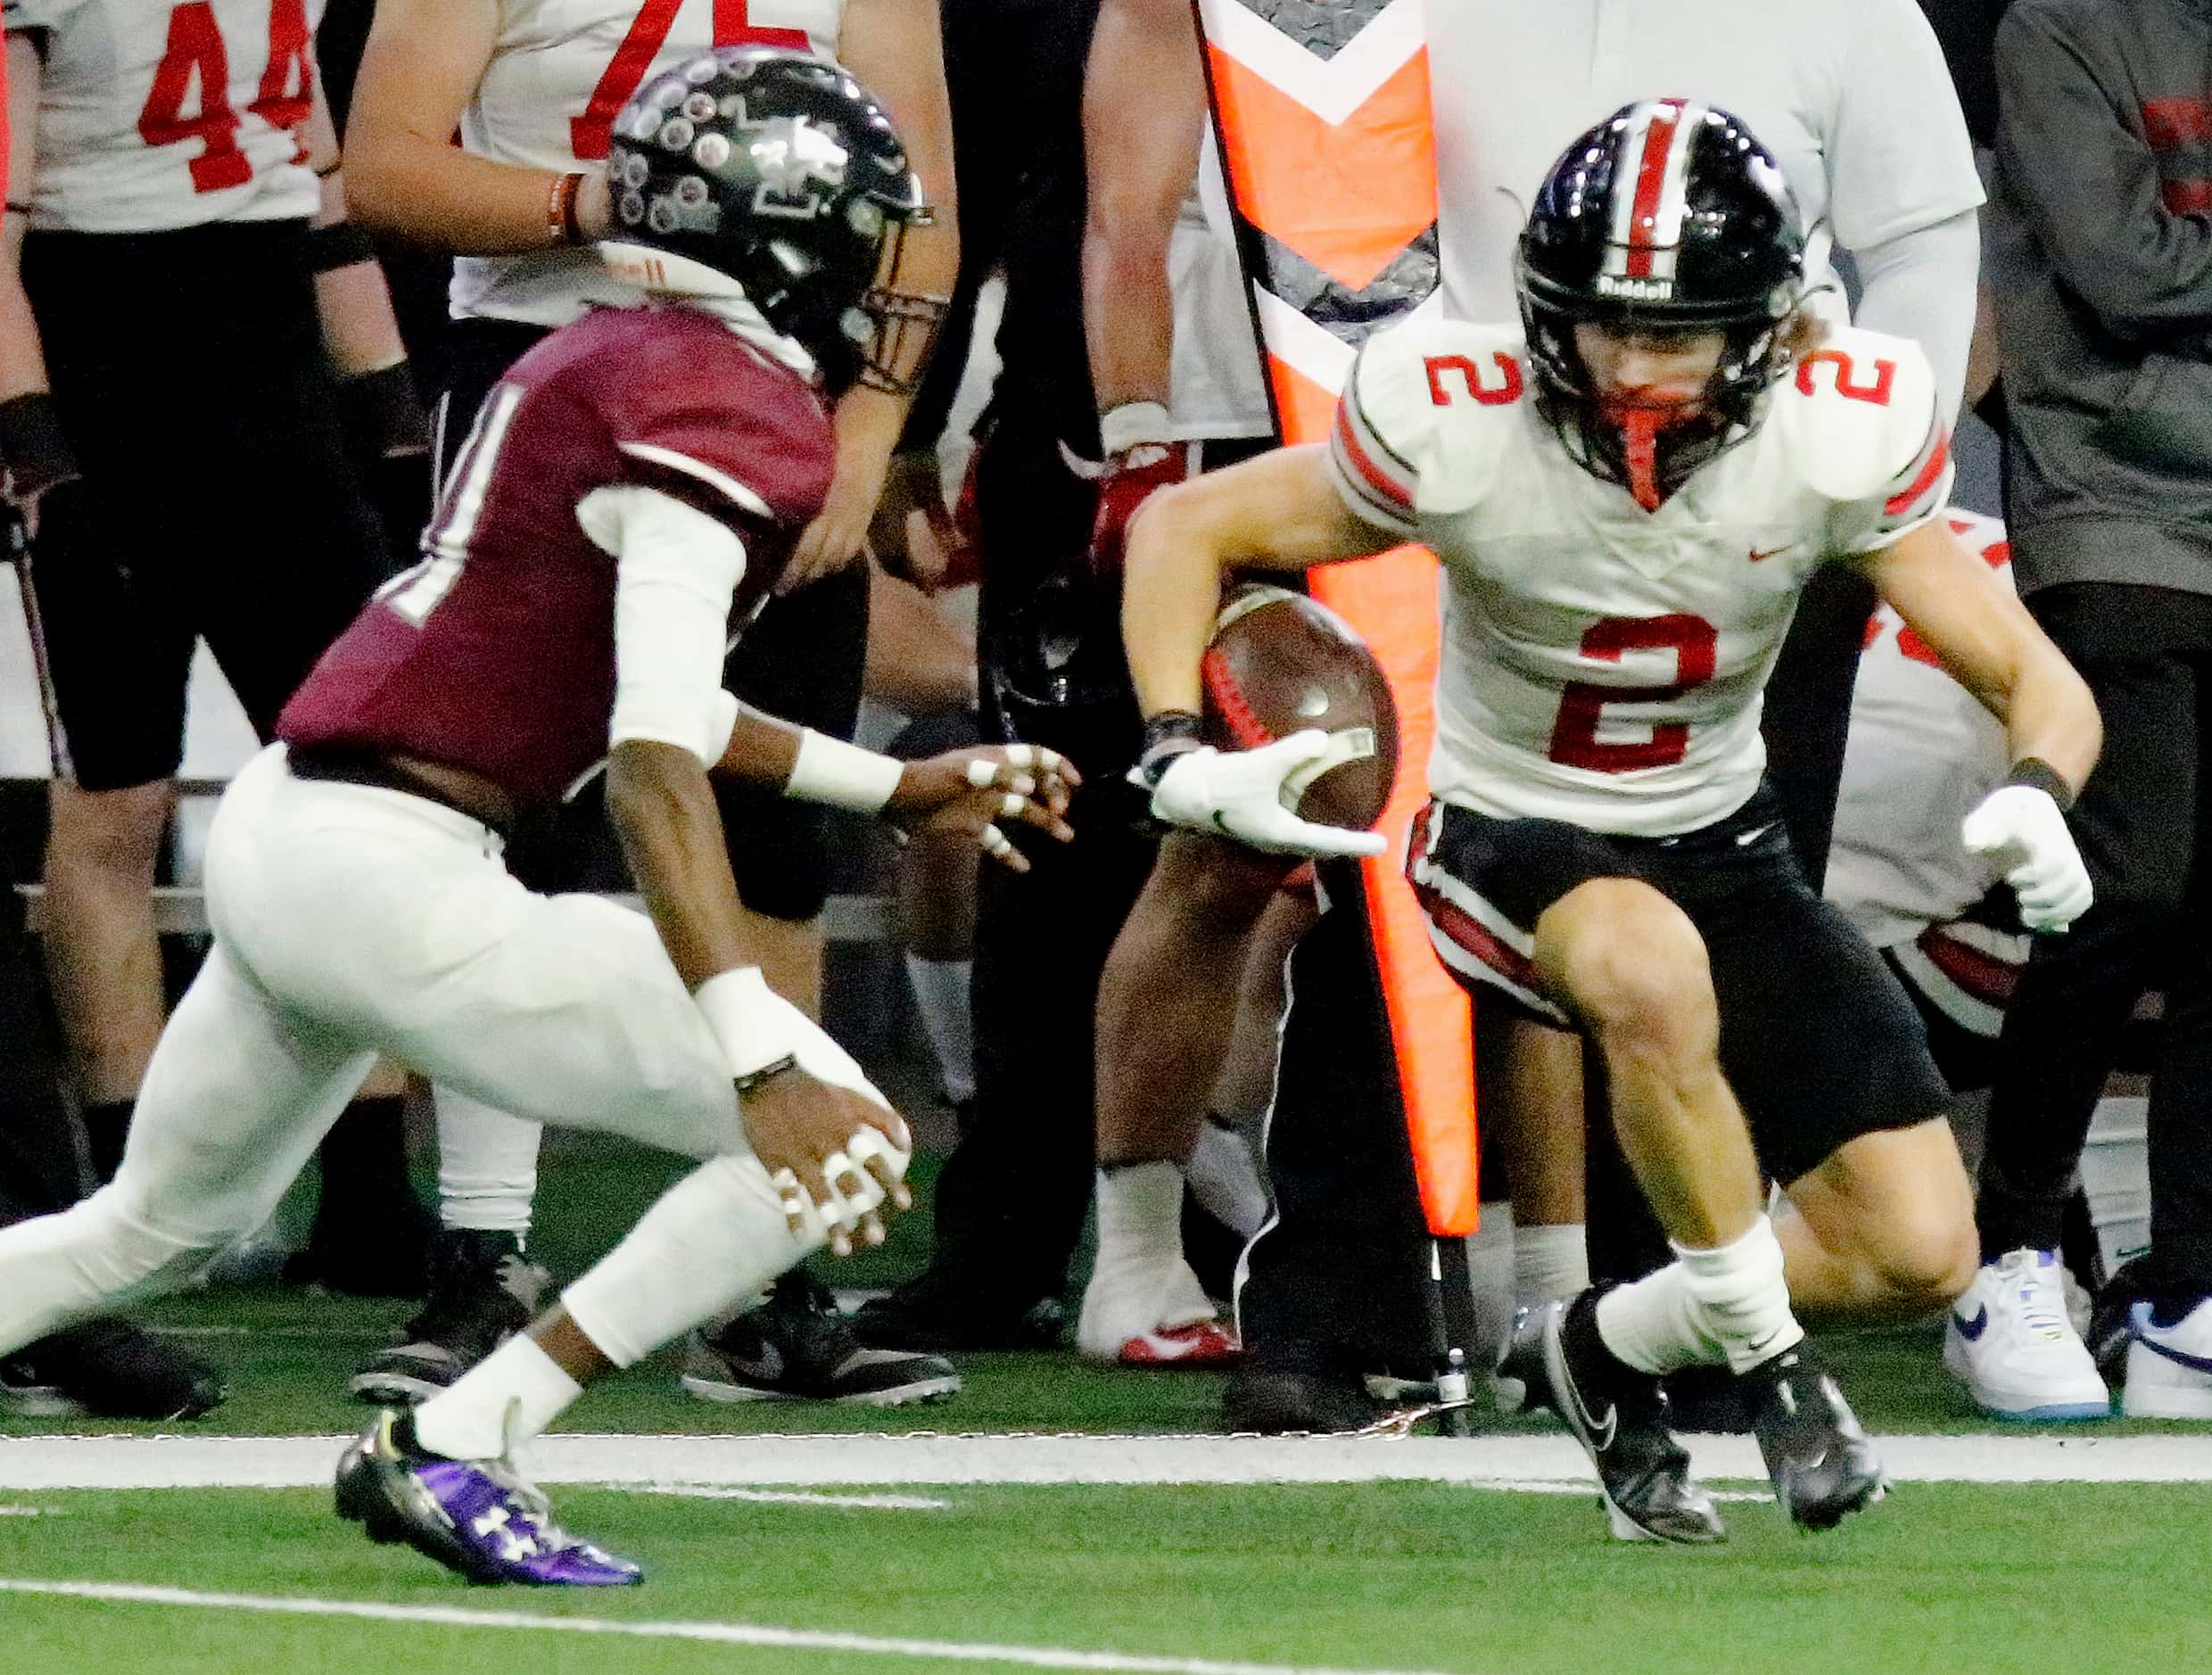 Lovejoy wide receiver Jaxson Lavender (2) looks to run as Mansfield Timberview High School...